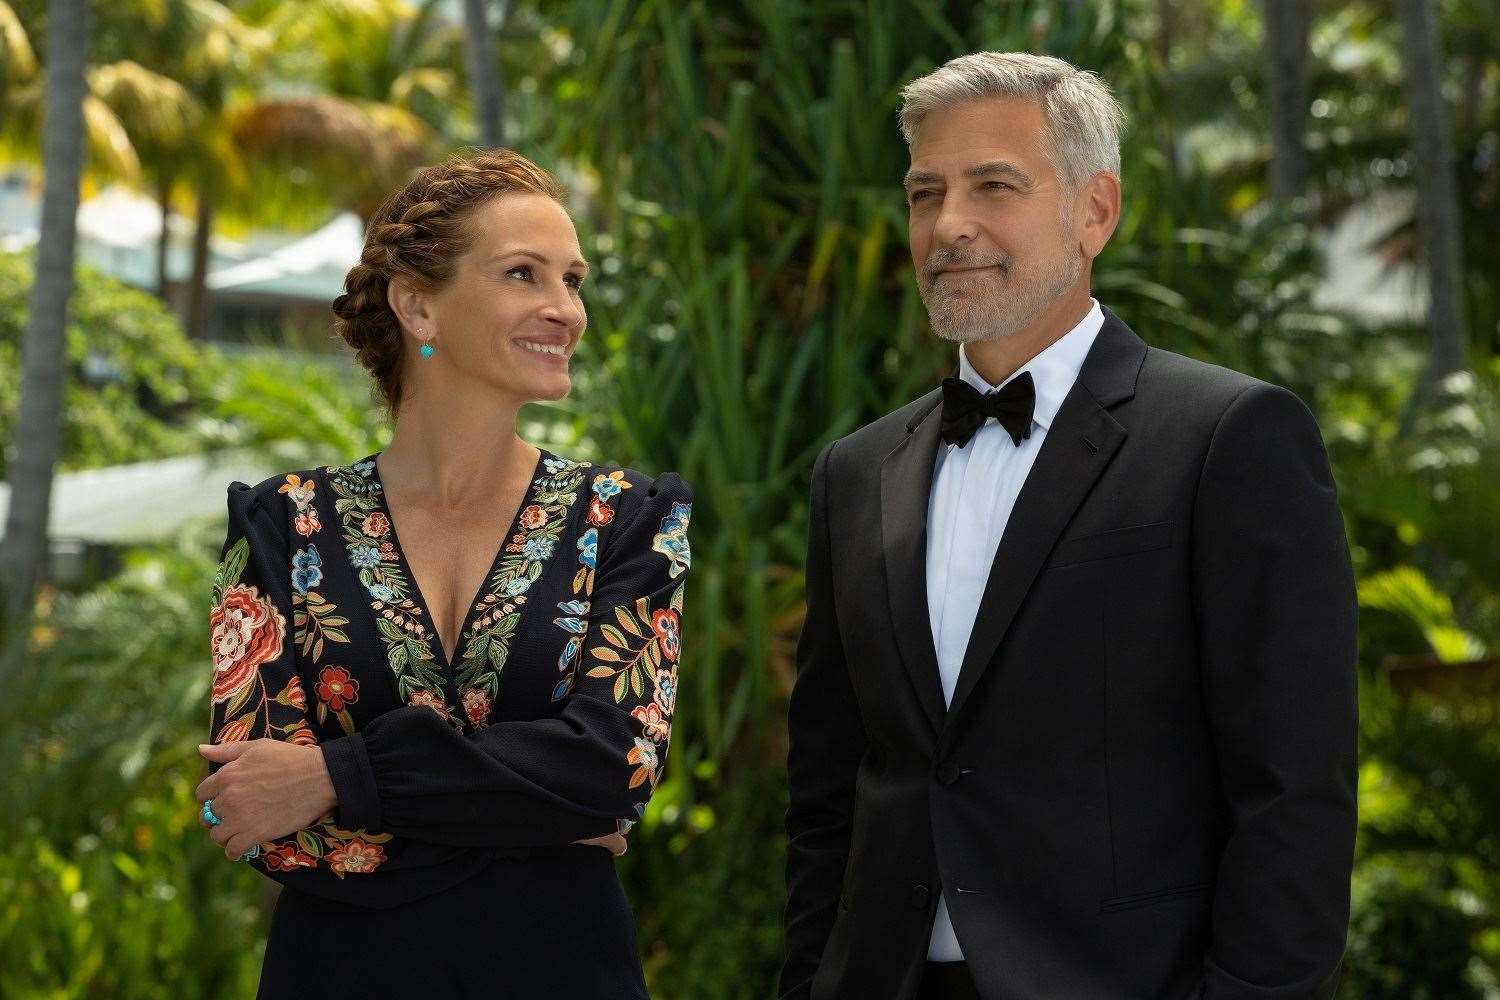 Julia Roberts as Georgia and George Clooney as David in Ticket To Paradise.